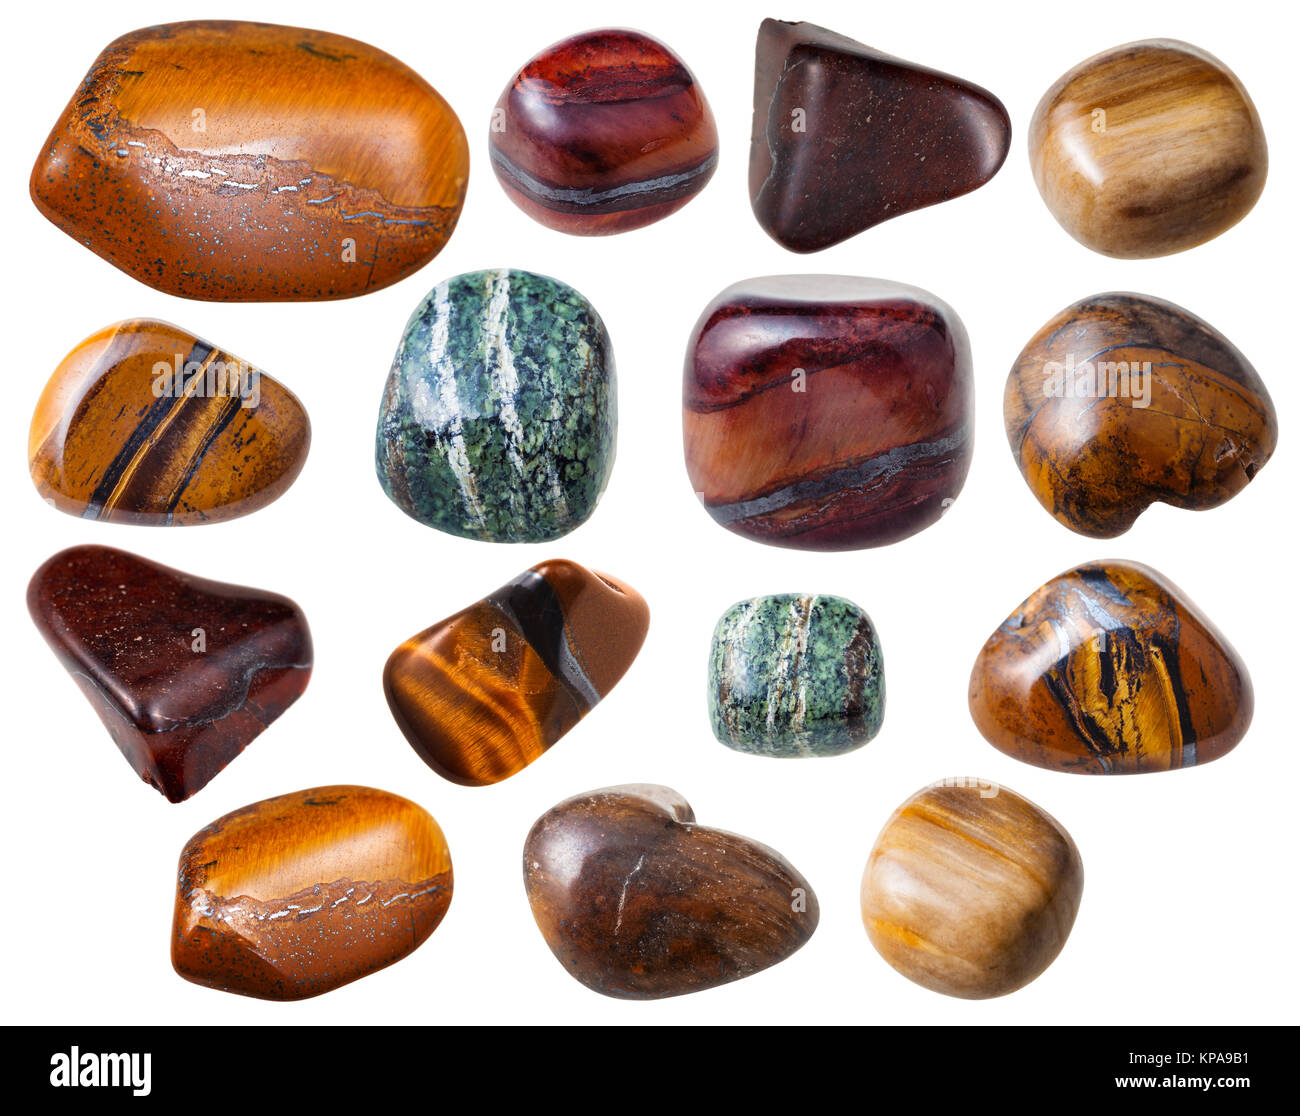 Tiger S Eye Stone High Resolution Stock Photography And Images Alamy,Ficus Lyrata Variegata